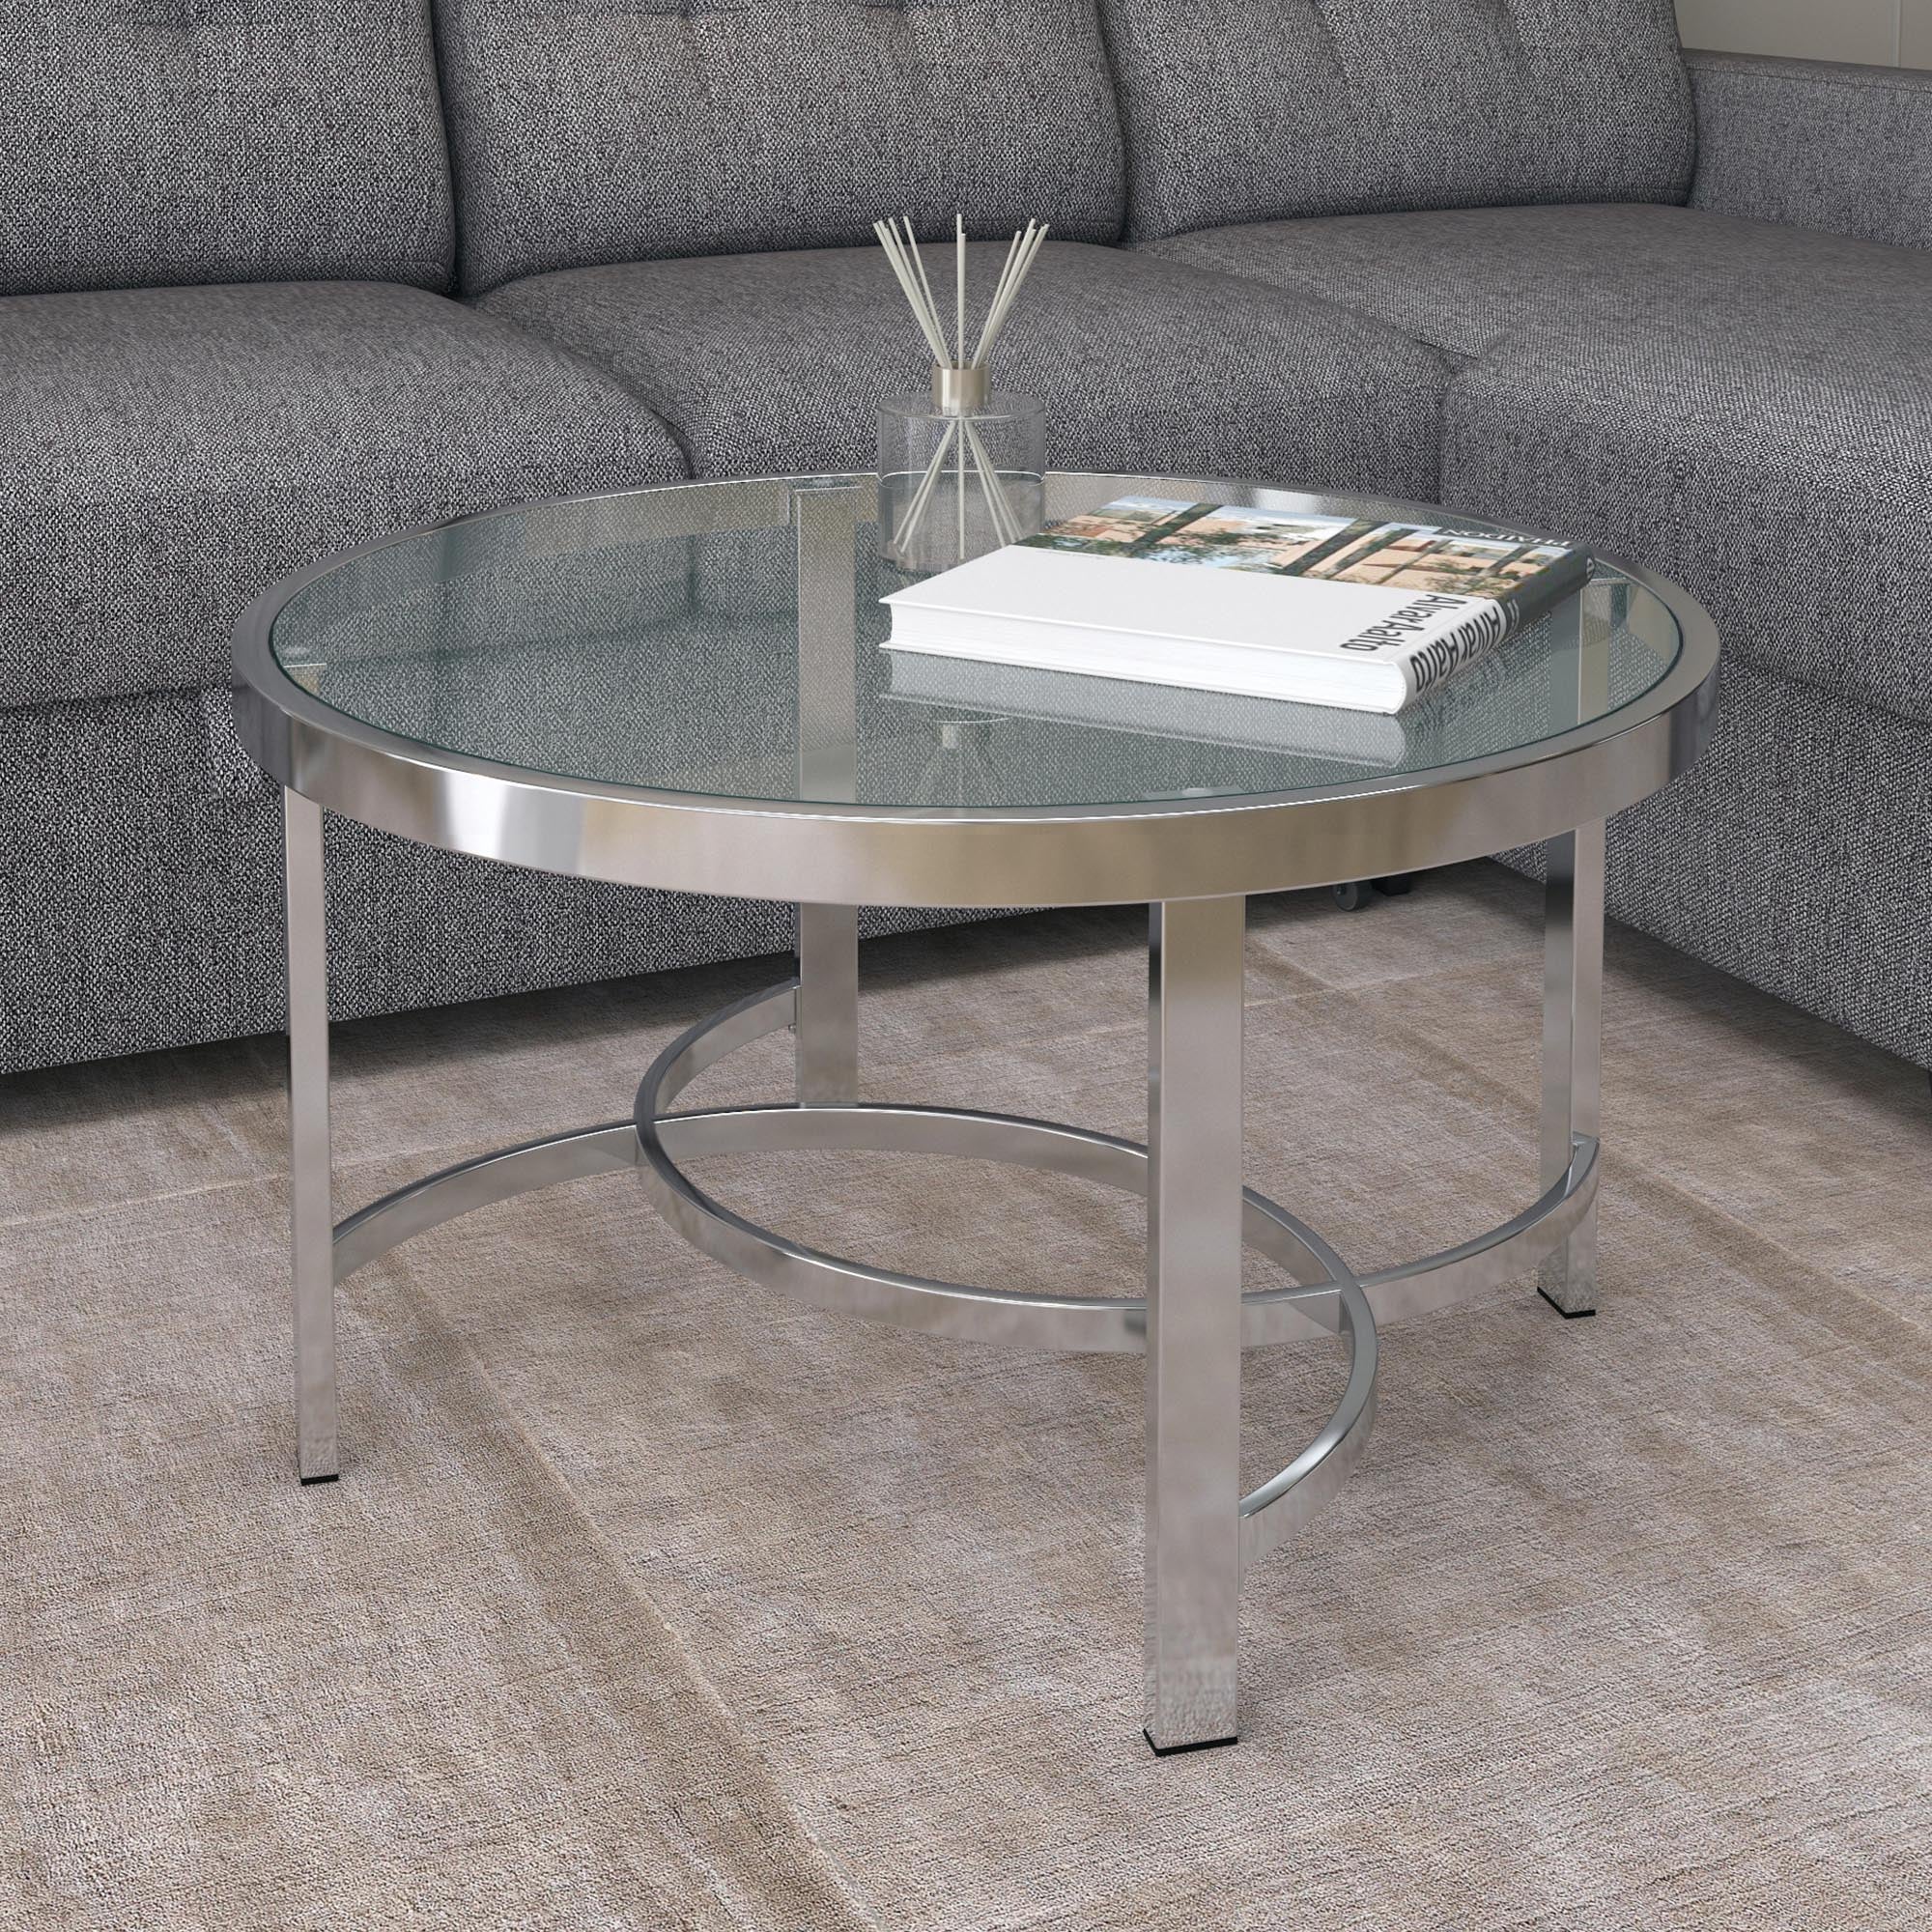 Strata Coffee Table in Chrome 301-746